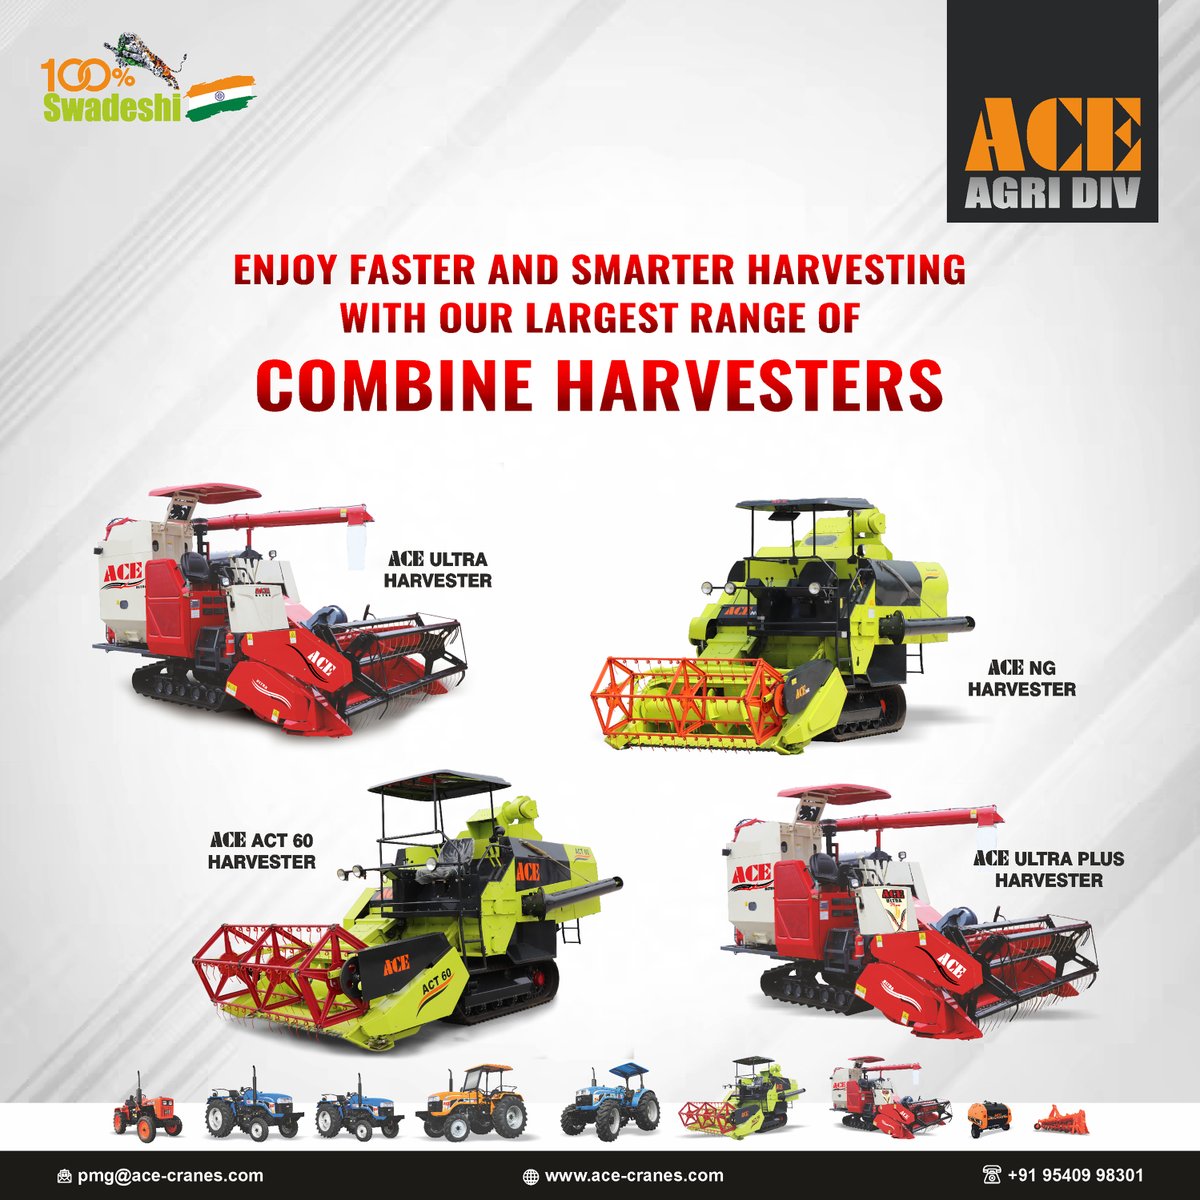 Enjoy faster and smarter harvesting with our largest range of Combine Harvesters.
#ACE #ACETractorsIndia #Combine #Harvester #ACECombine #ACEHarvester #CombineHarvester #Farming #AgriEquipment